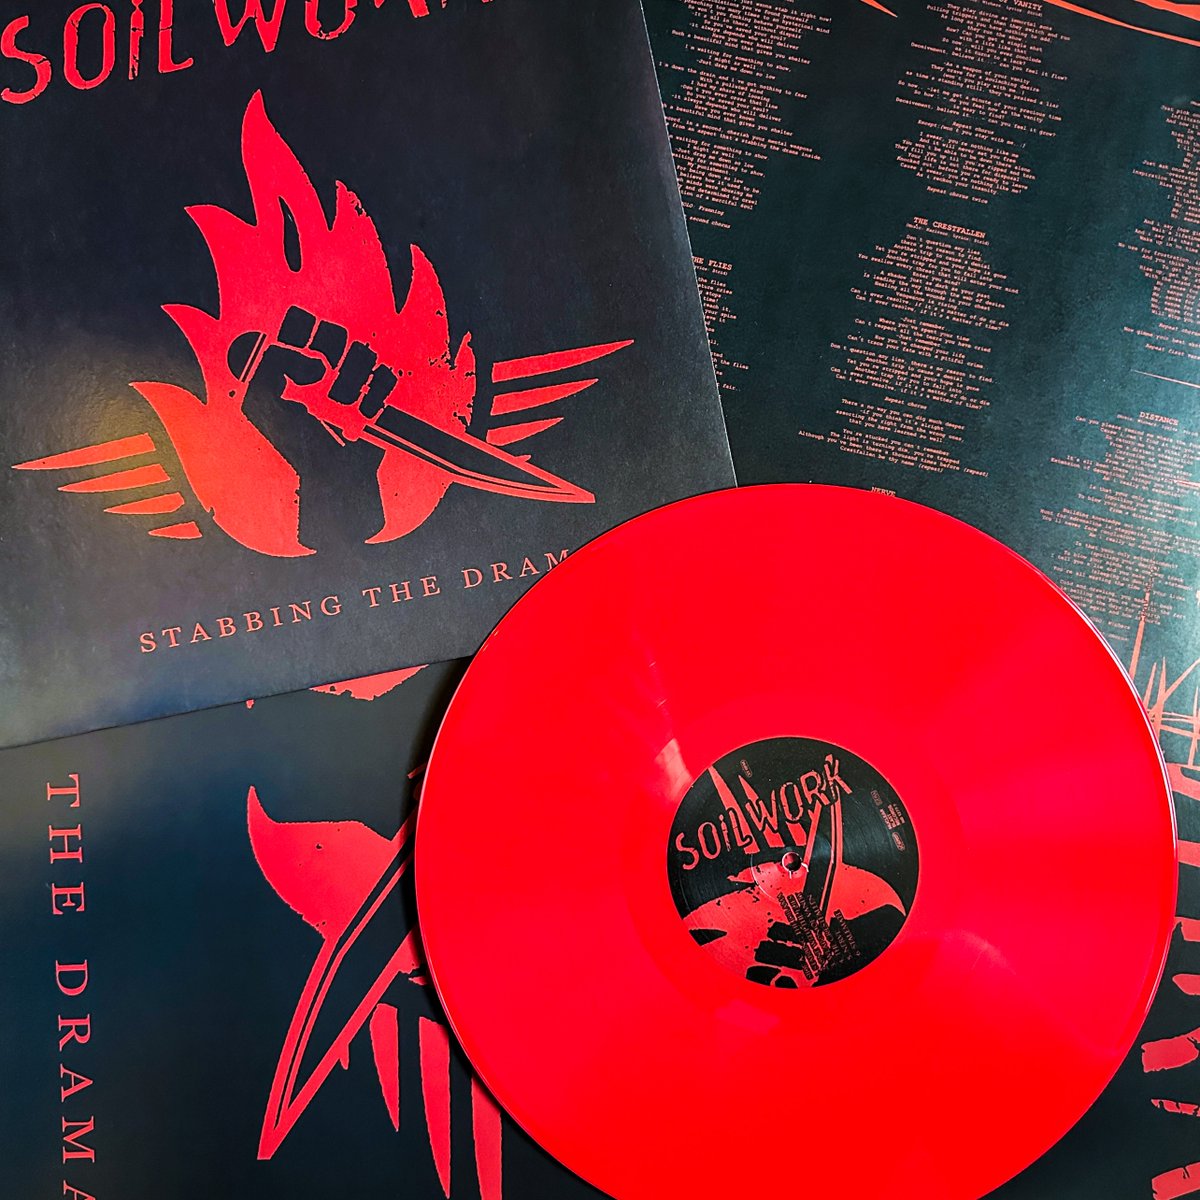 It’s finally here 'Stabbing the Drama' new limited vinyl is out now! Have you got yours yet? Click here to order : soilwork.bfan.link/stabbing-the-d…